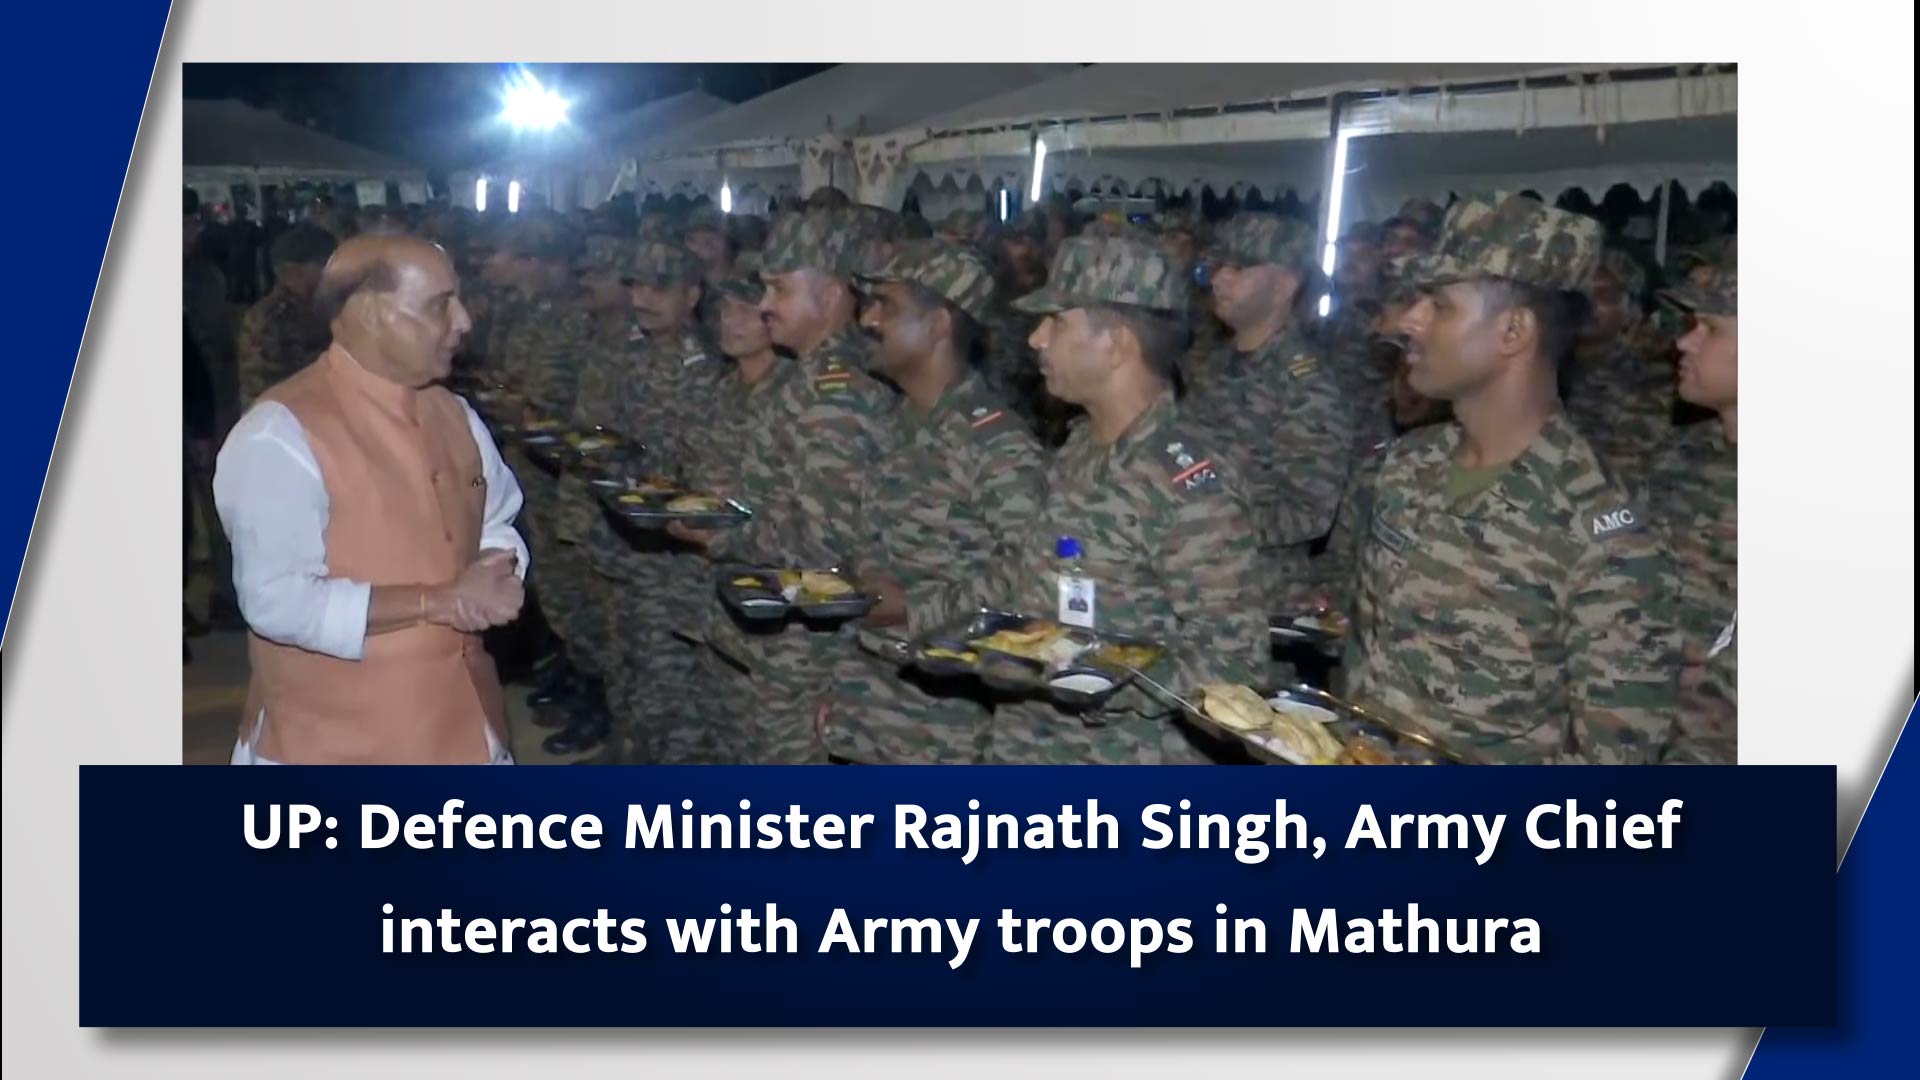 UP: Defence Minister Rajnath Singh, Army Chief interacts with Army troops in Mathura